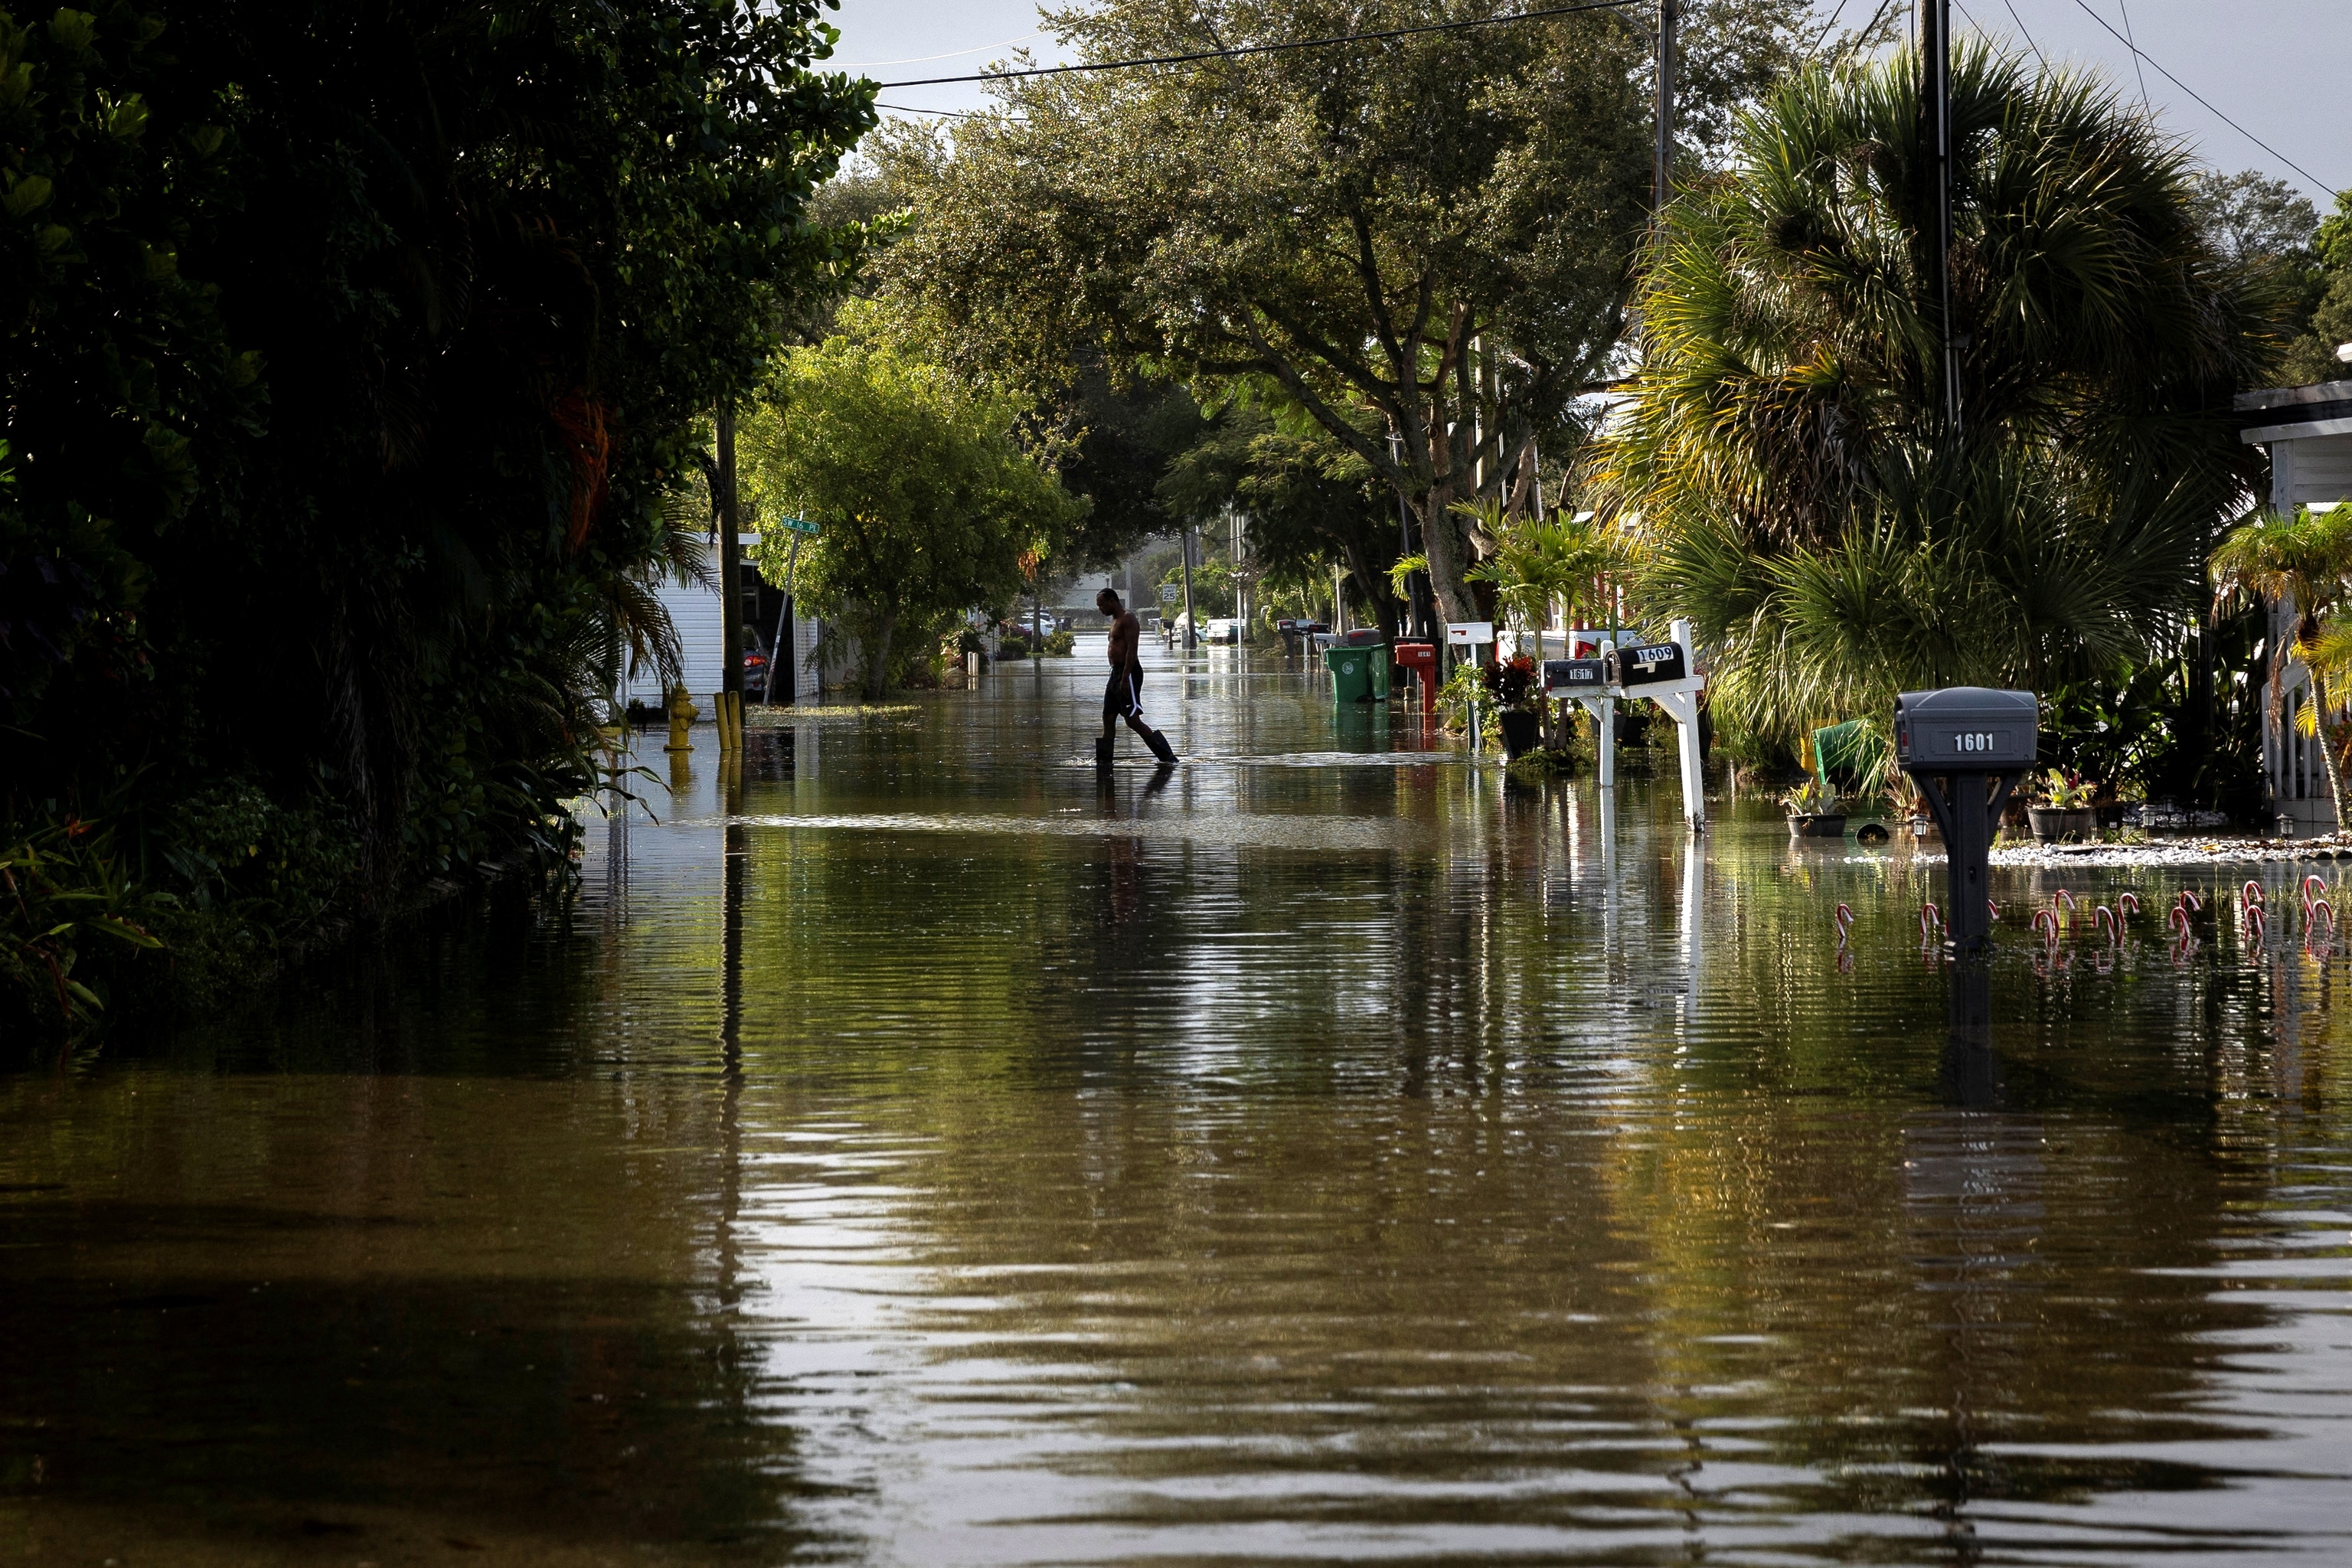 PHOTO: A man walks in a flooded street in a trailer park community in Davie, Florida, November 16, 2023.